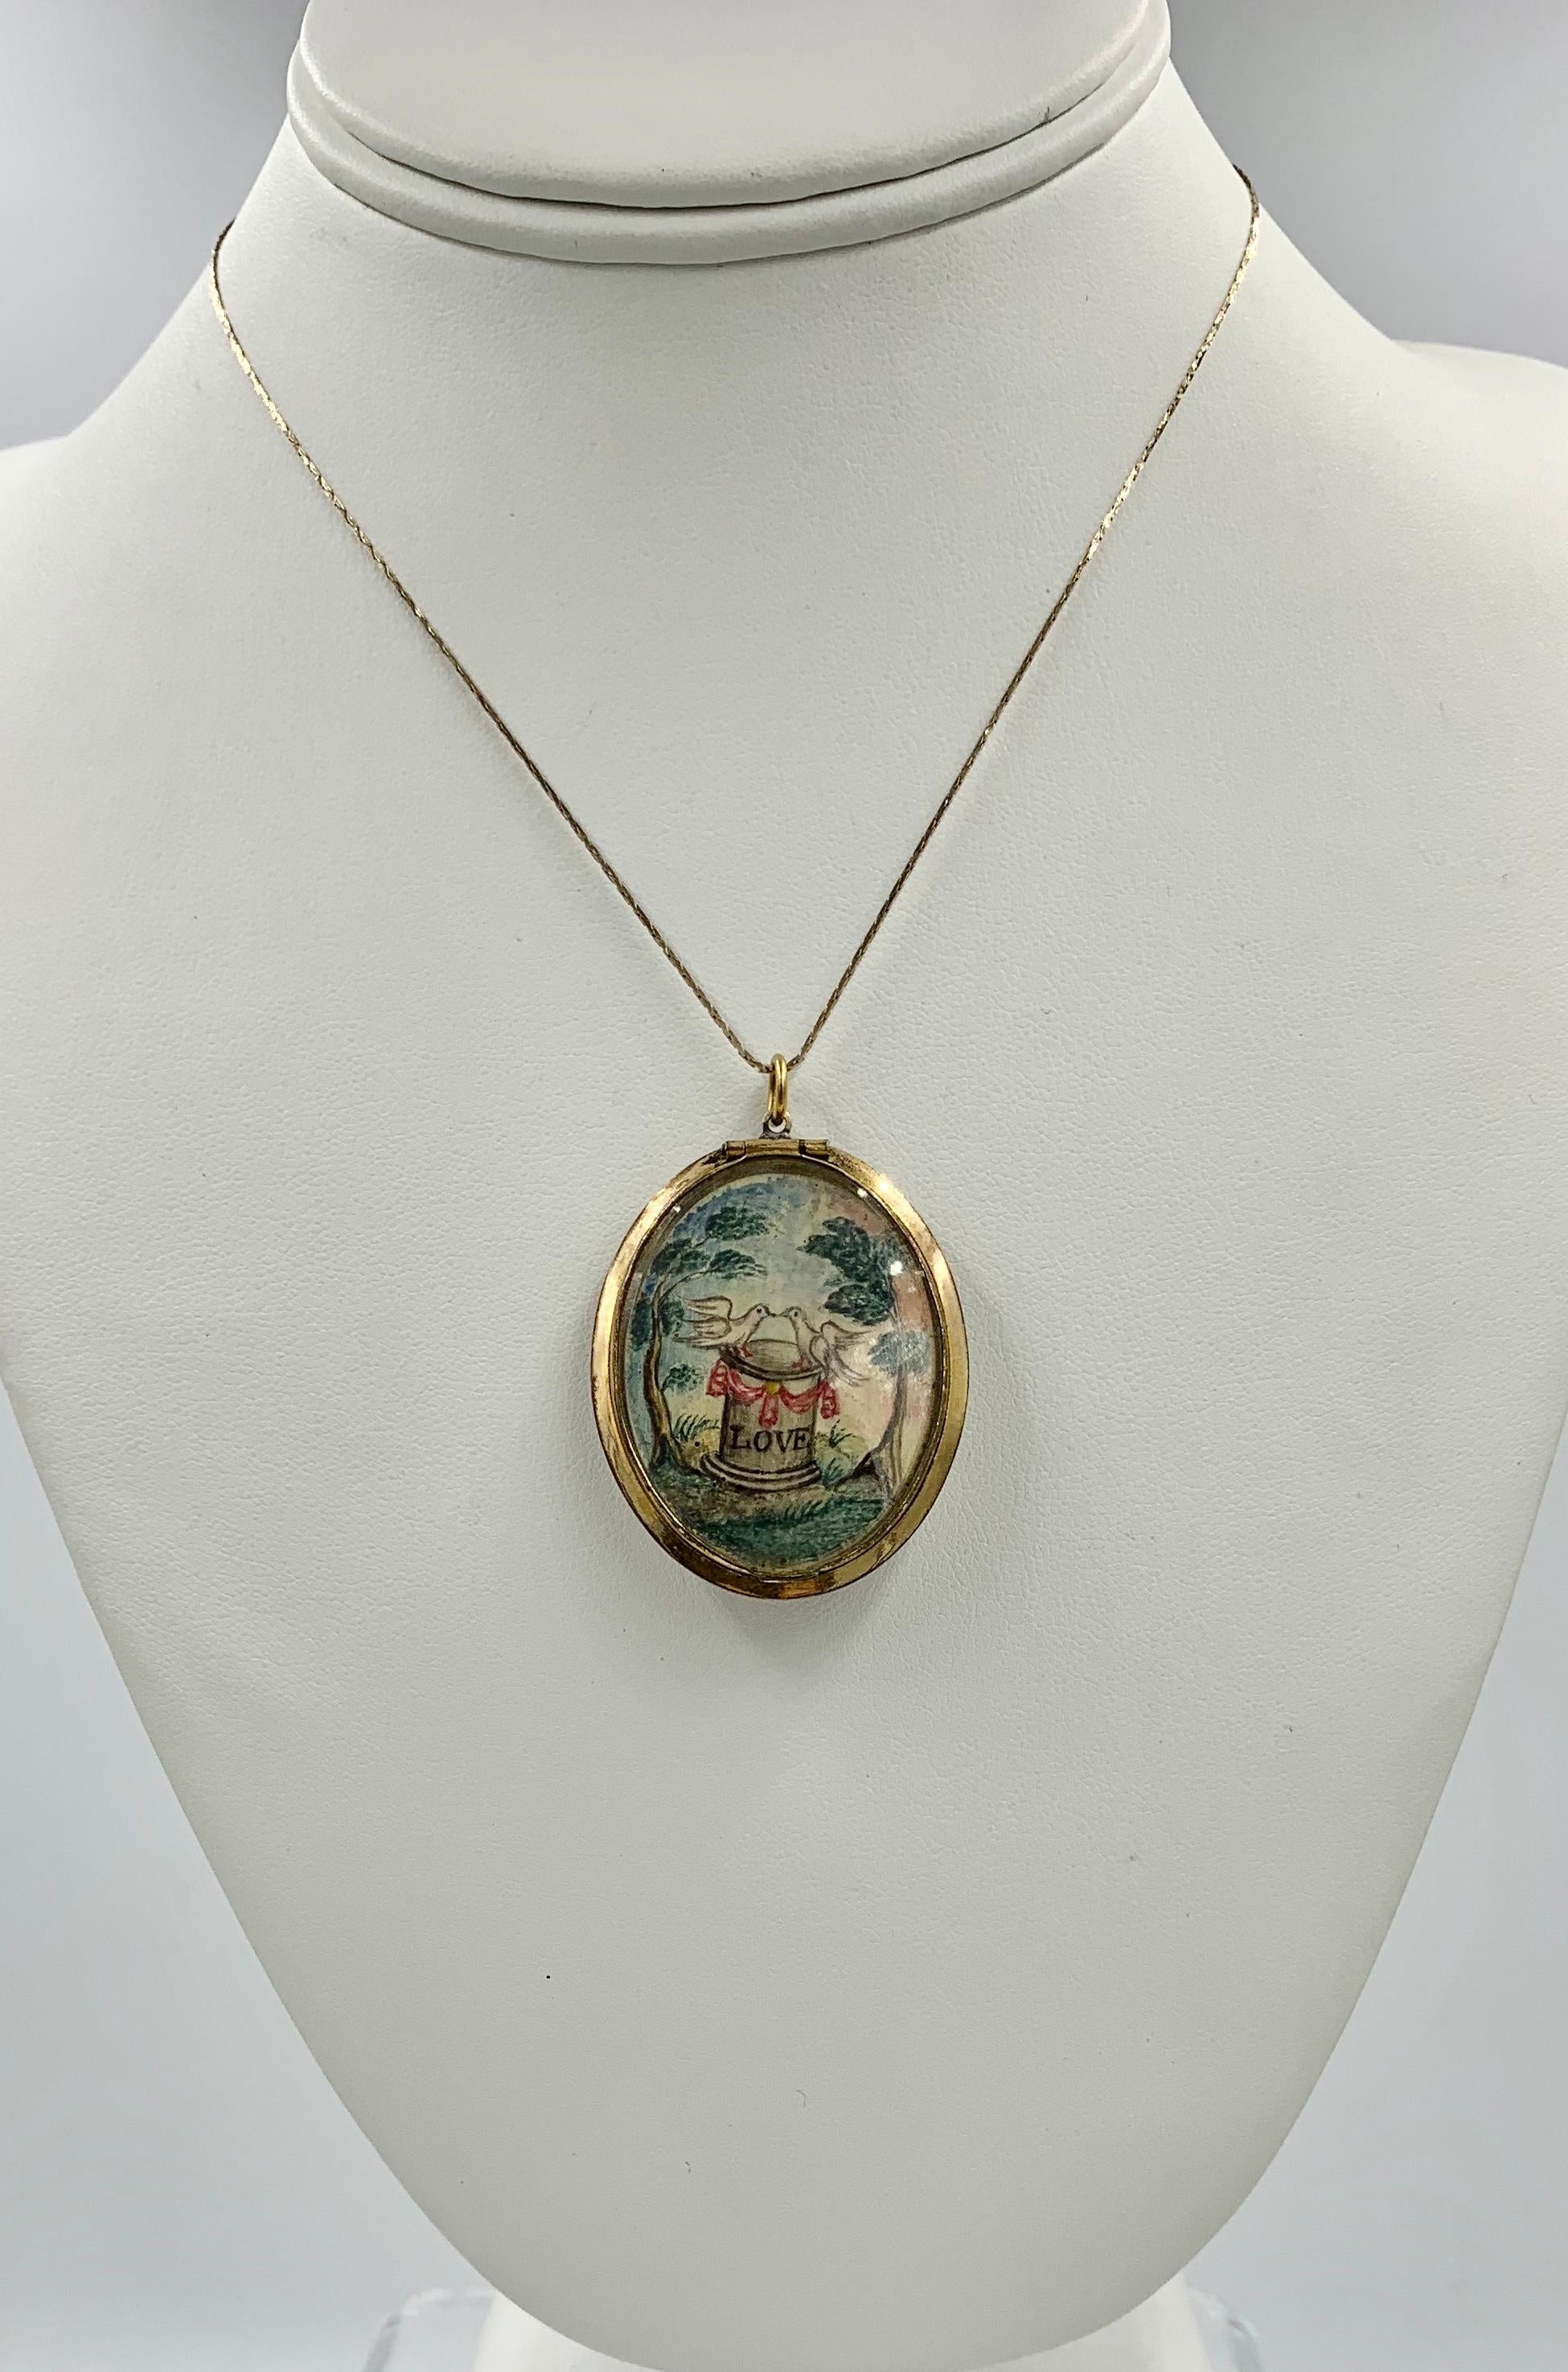 A very early and rare Museum Quality Georgian Love Token Mourning Jewelry Locket Pendant.  On one side of the locket is an exquisite miniature painting of two dove birds on a pedestal with the word LOVE below a red garland ribbon.  The pedestal or